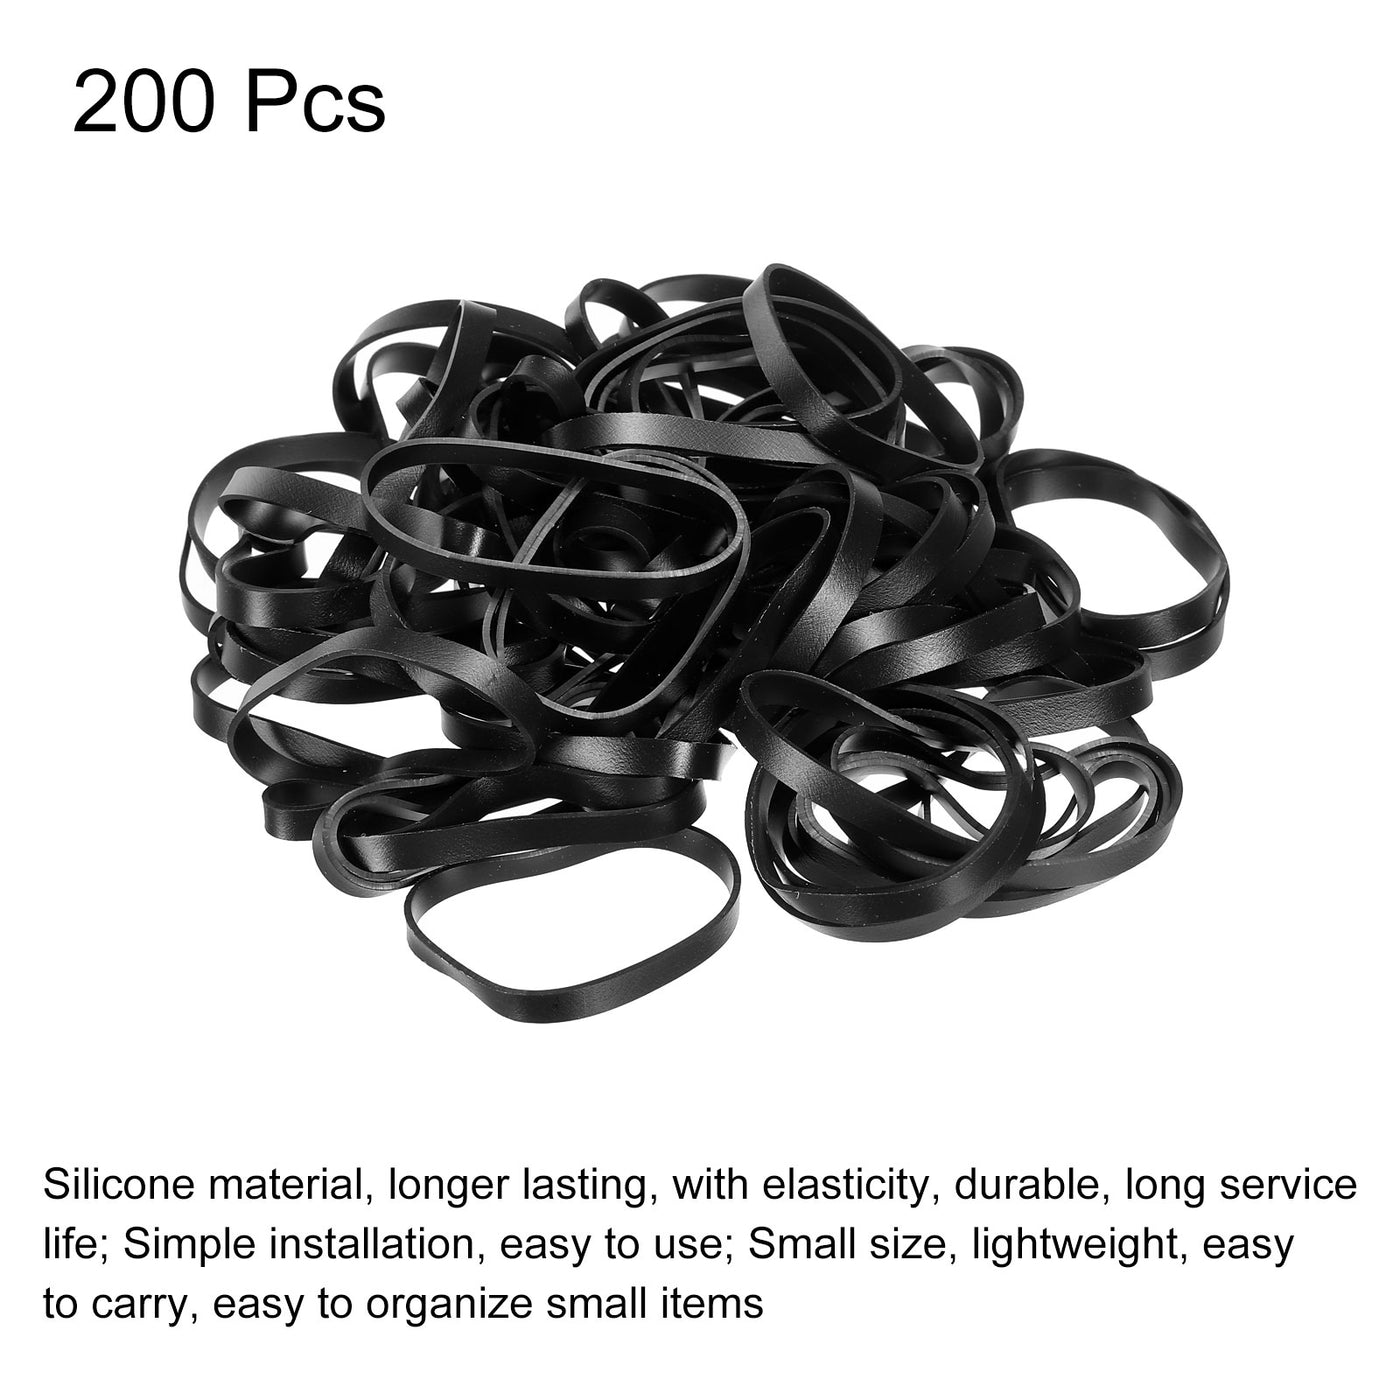 Harfington Silicone Rubber Bands Rings 200pcs Non-slip 2.2" Flat Black for Books, Art, Boxes, Cord Wrapping, Bag Wraps